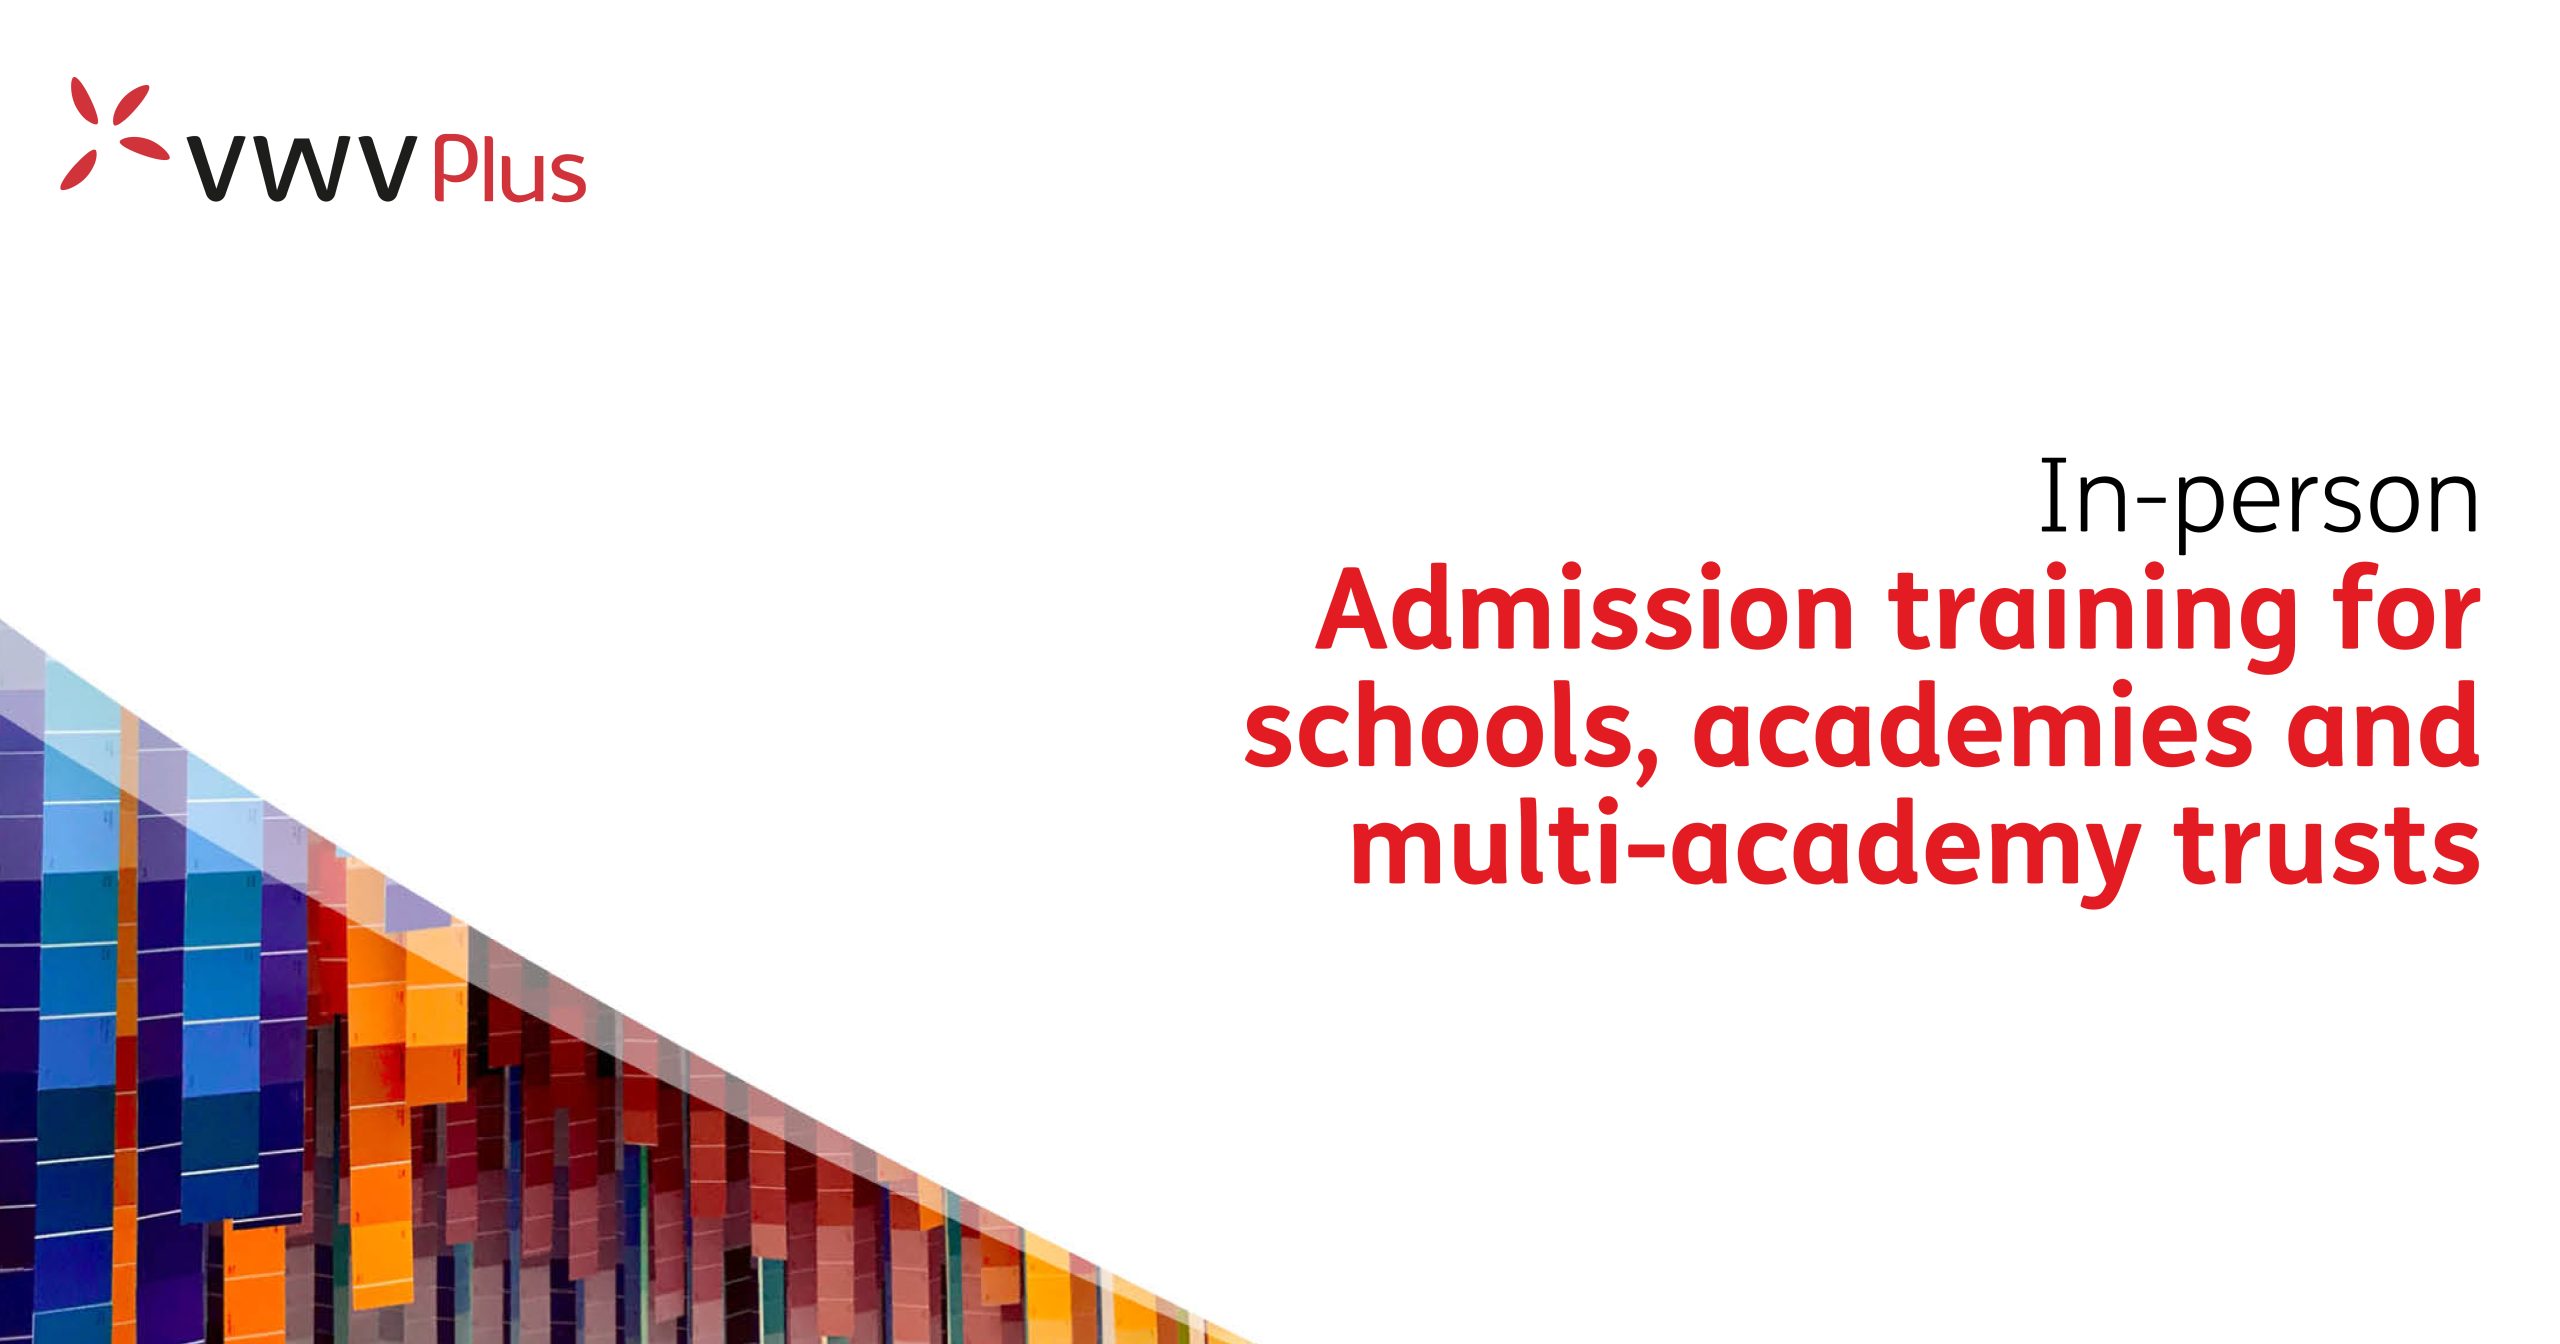 Admission training for schools, academies and multi-academy trusts